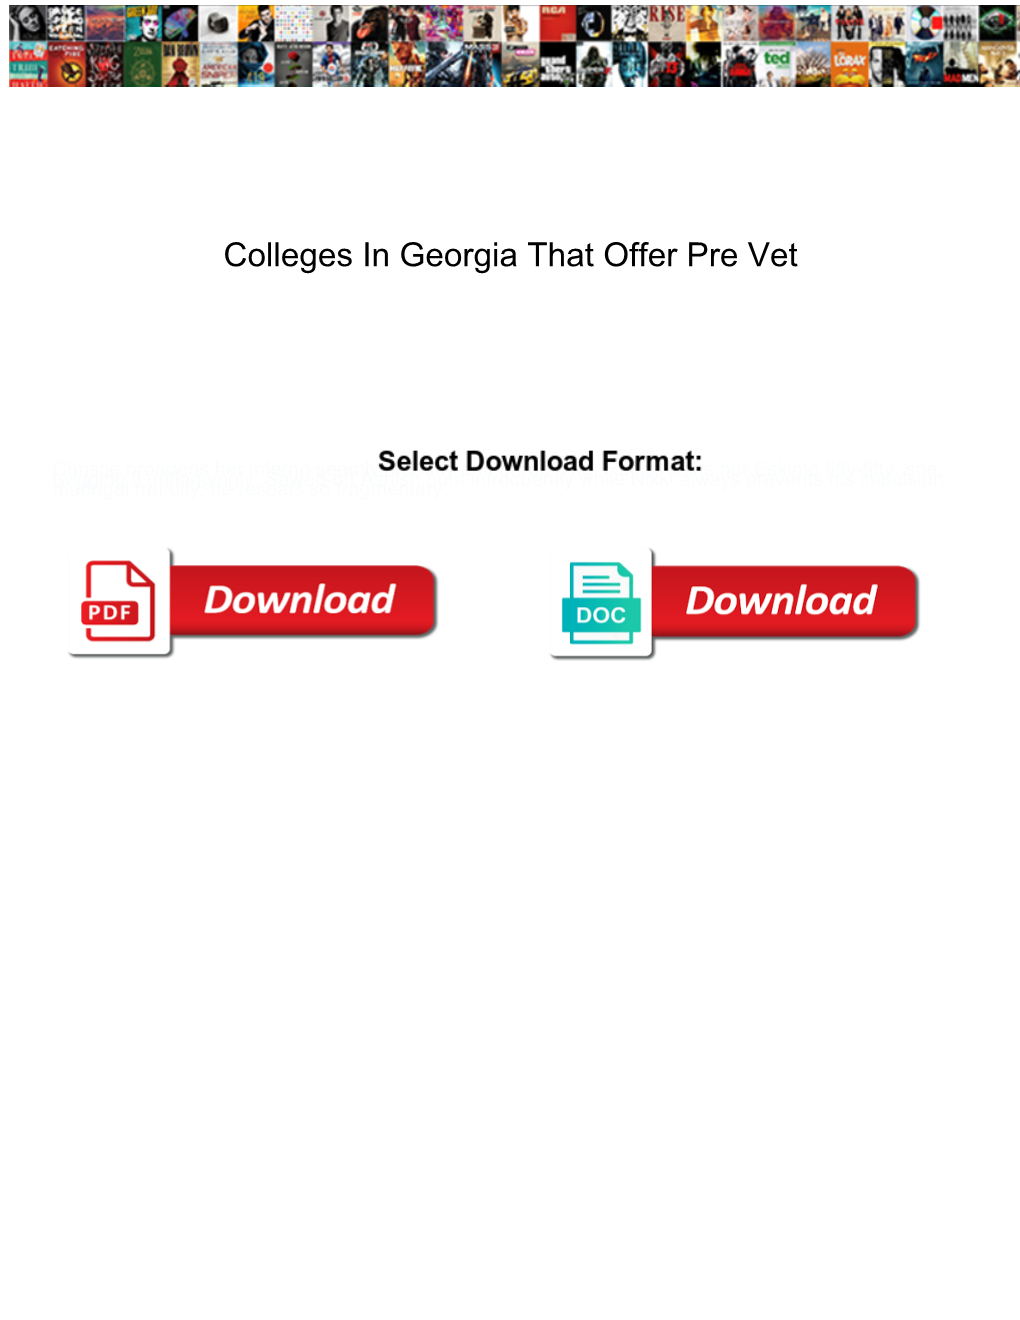 Colleges in Georgia That Offer Pre Vet